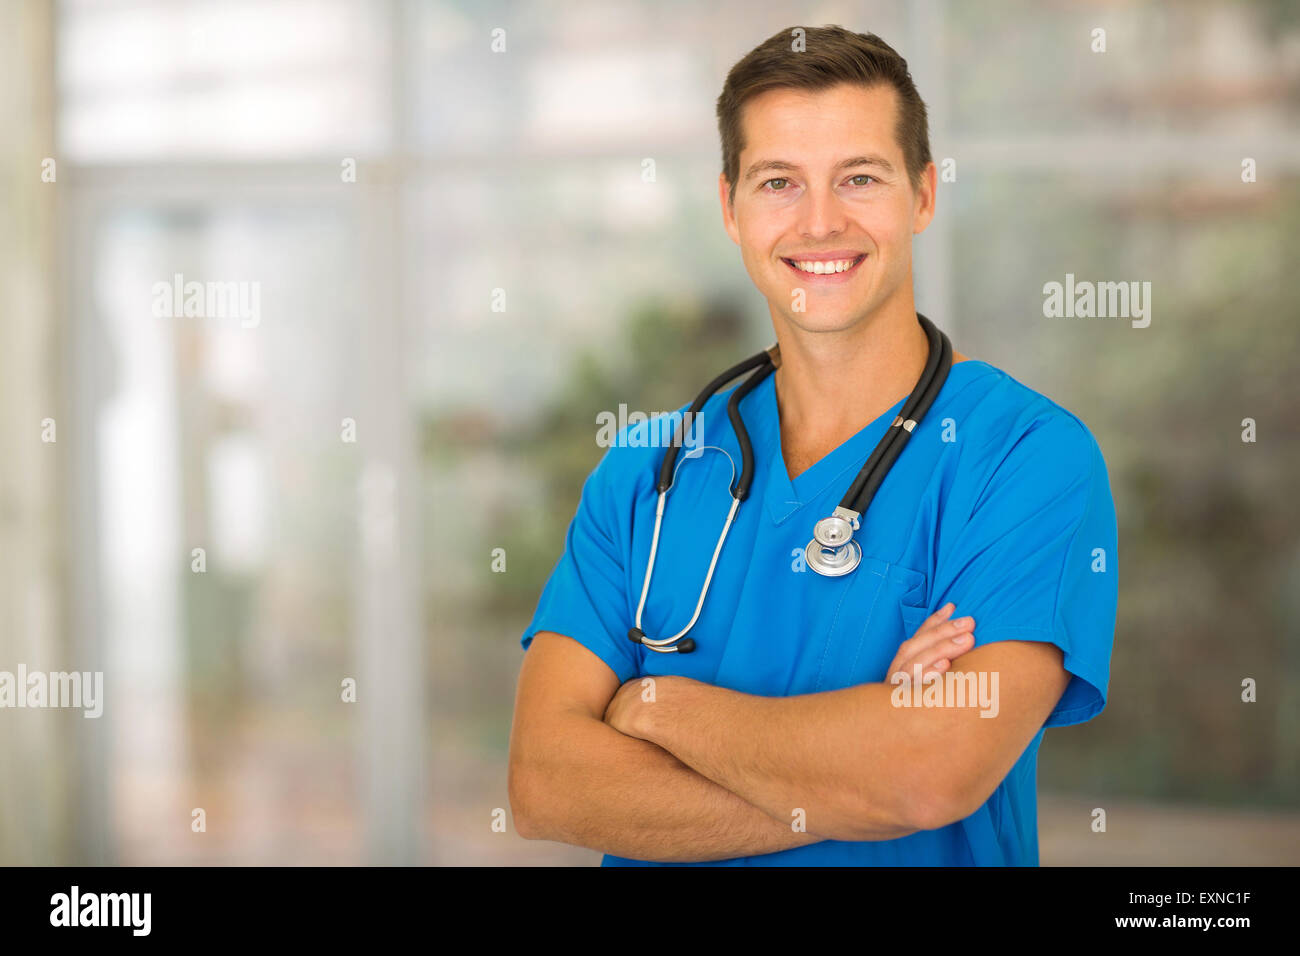 good looking medical intern with arms crossed Stock Photo